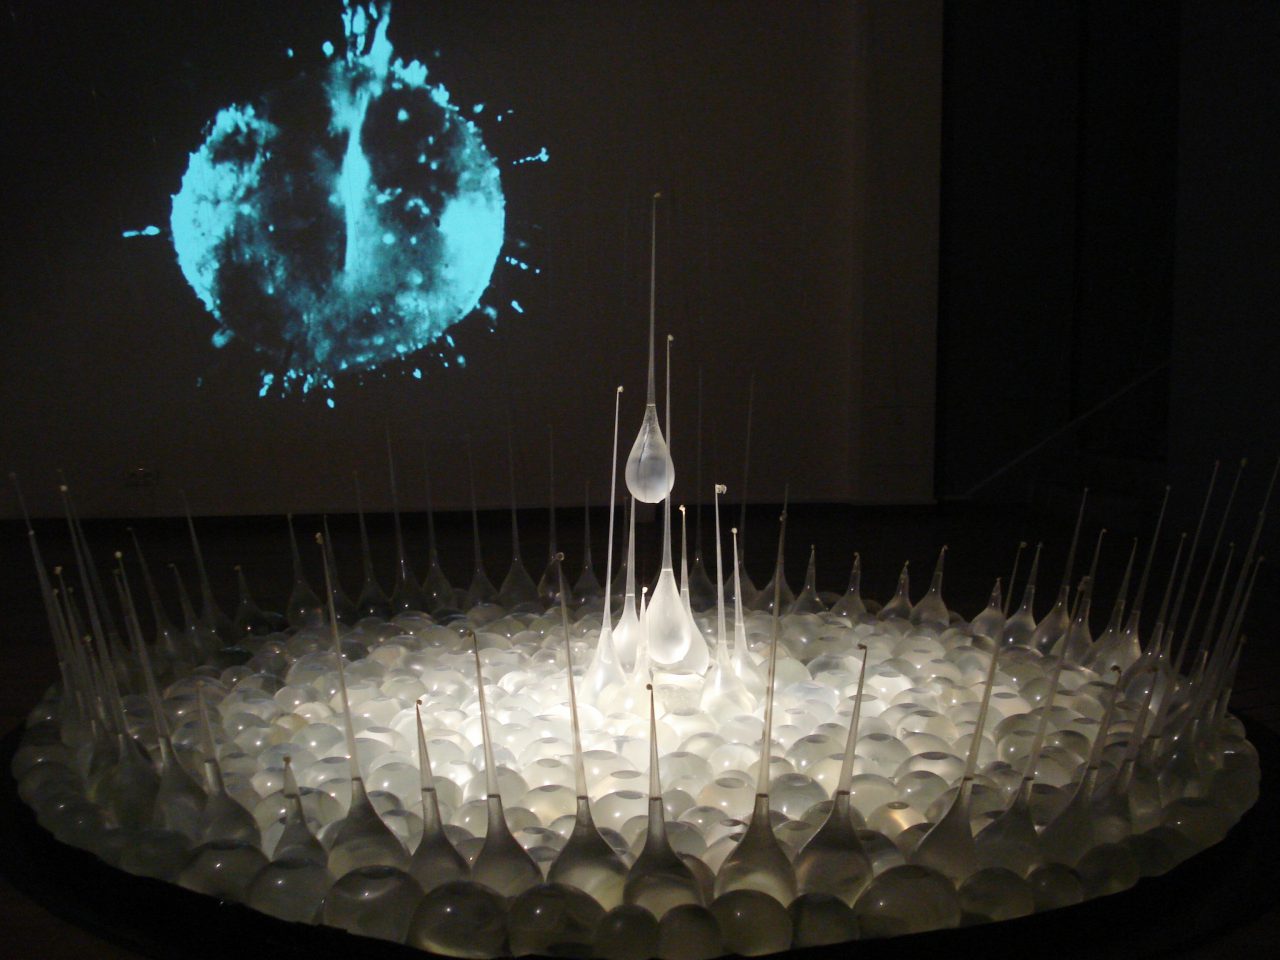 SPEED OF FALLING by Alexei Kostroma at Multimedia Art Museum in Moscow, 2008. Multimedia installation: latex, water, video, sound, photos